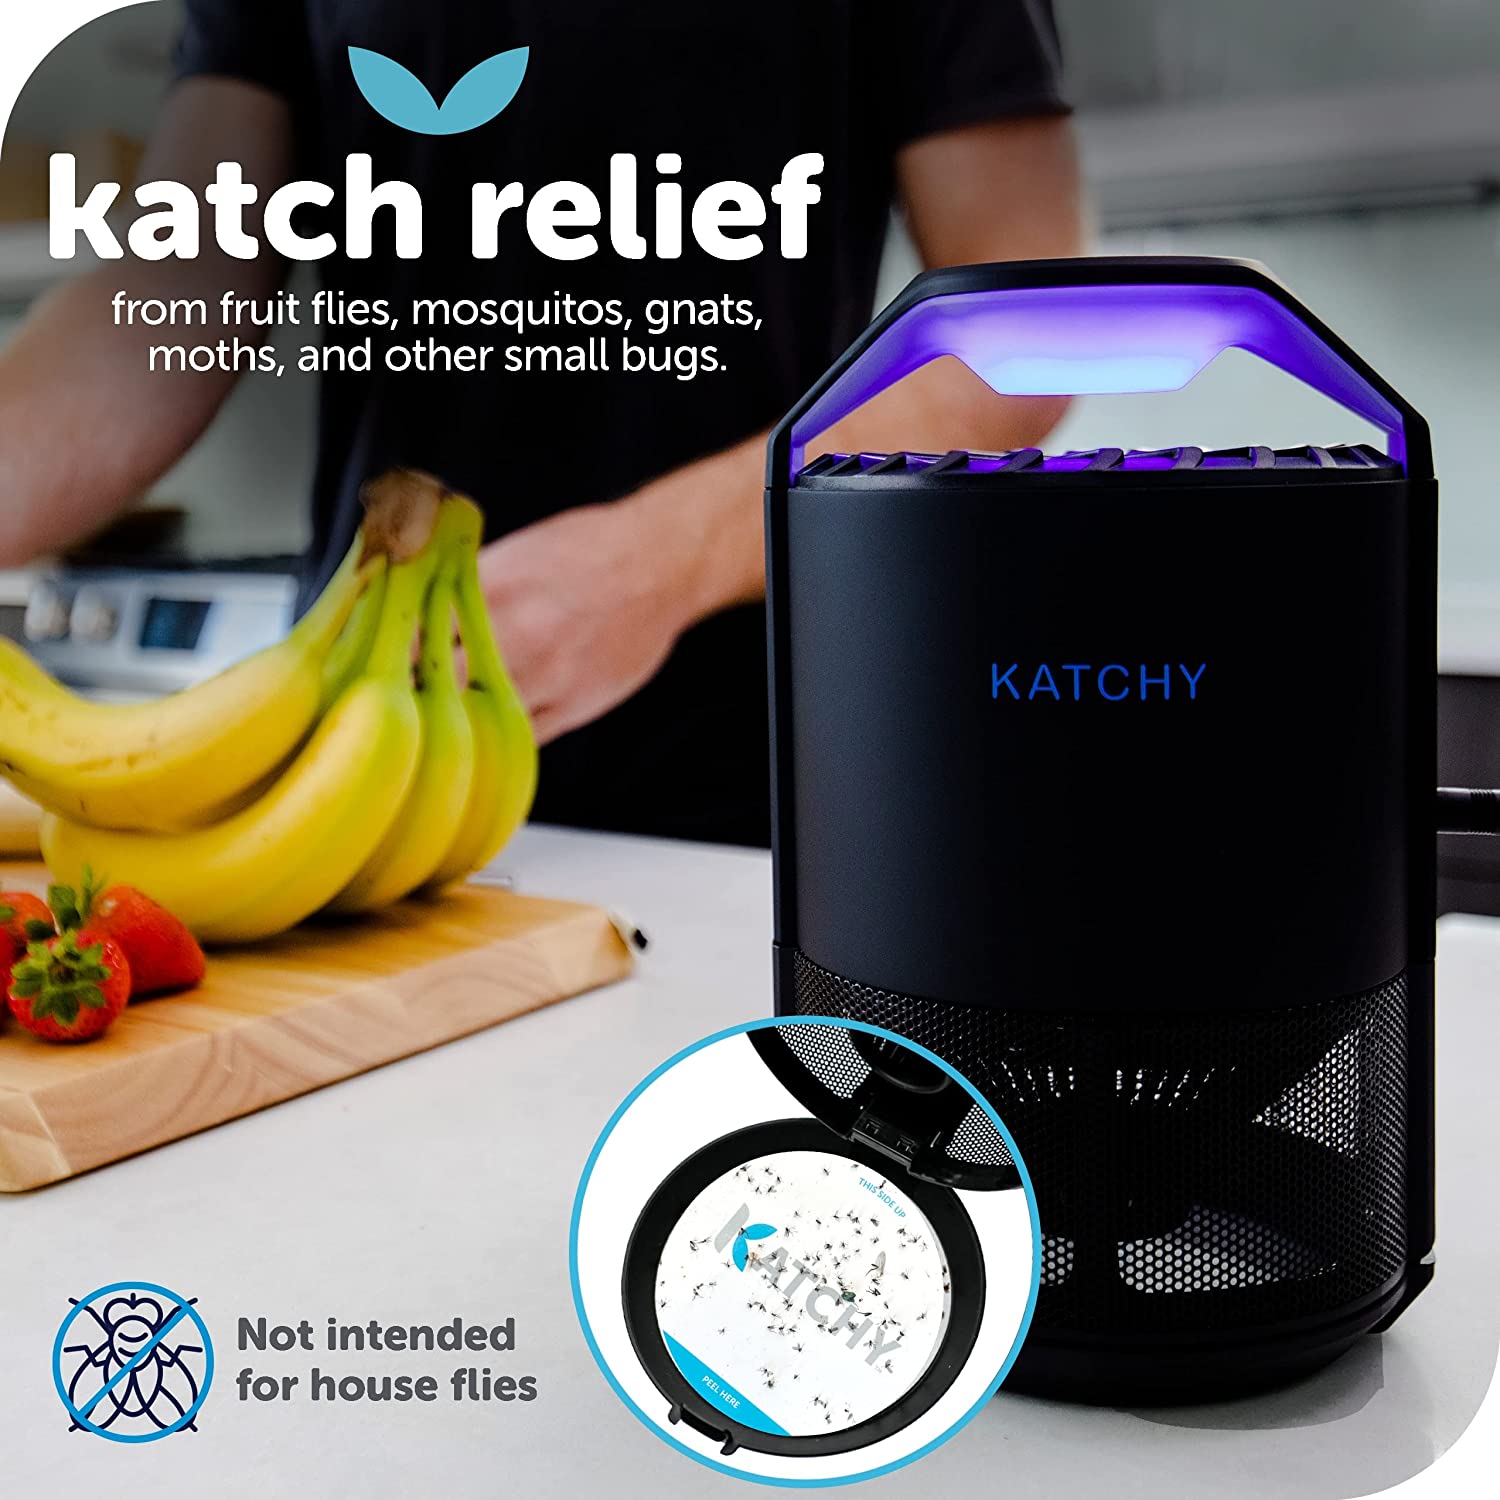 https://discounttoday.net/wp-content/uploads/2022/09/Katchy-Indoor-Insect-Trap-Catcher-Killer-for-Mosquitos-Gnats-Moths-Fruit-Flies-Non-Zapper-Traps-for-Inside-Your-Home-Catch-Insects-Indoors-with-Suction-Bug-Light-Sticky-Glue-Black1.jpg